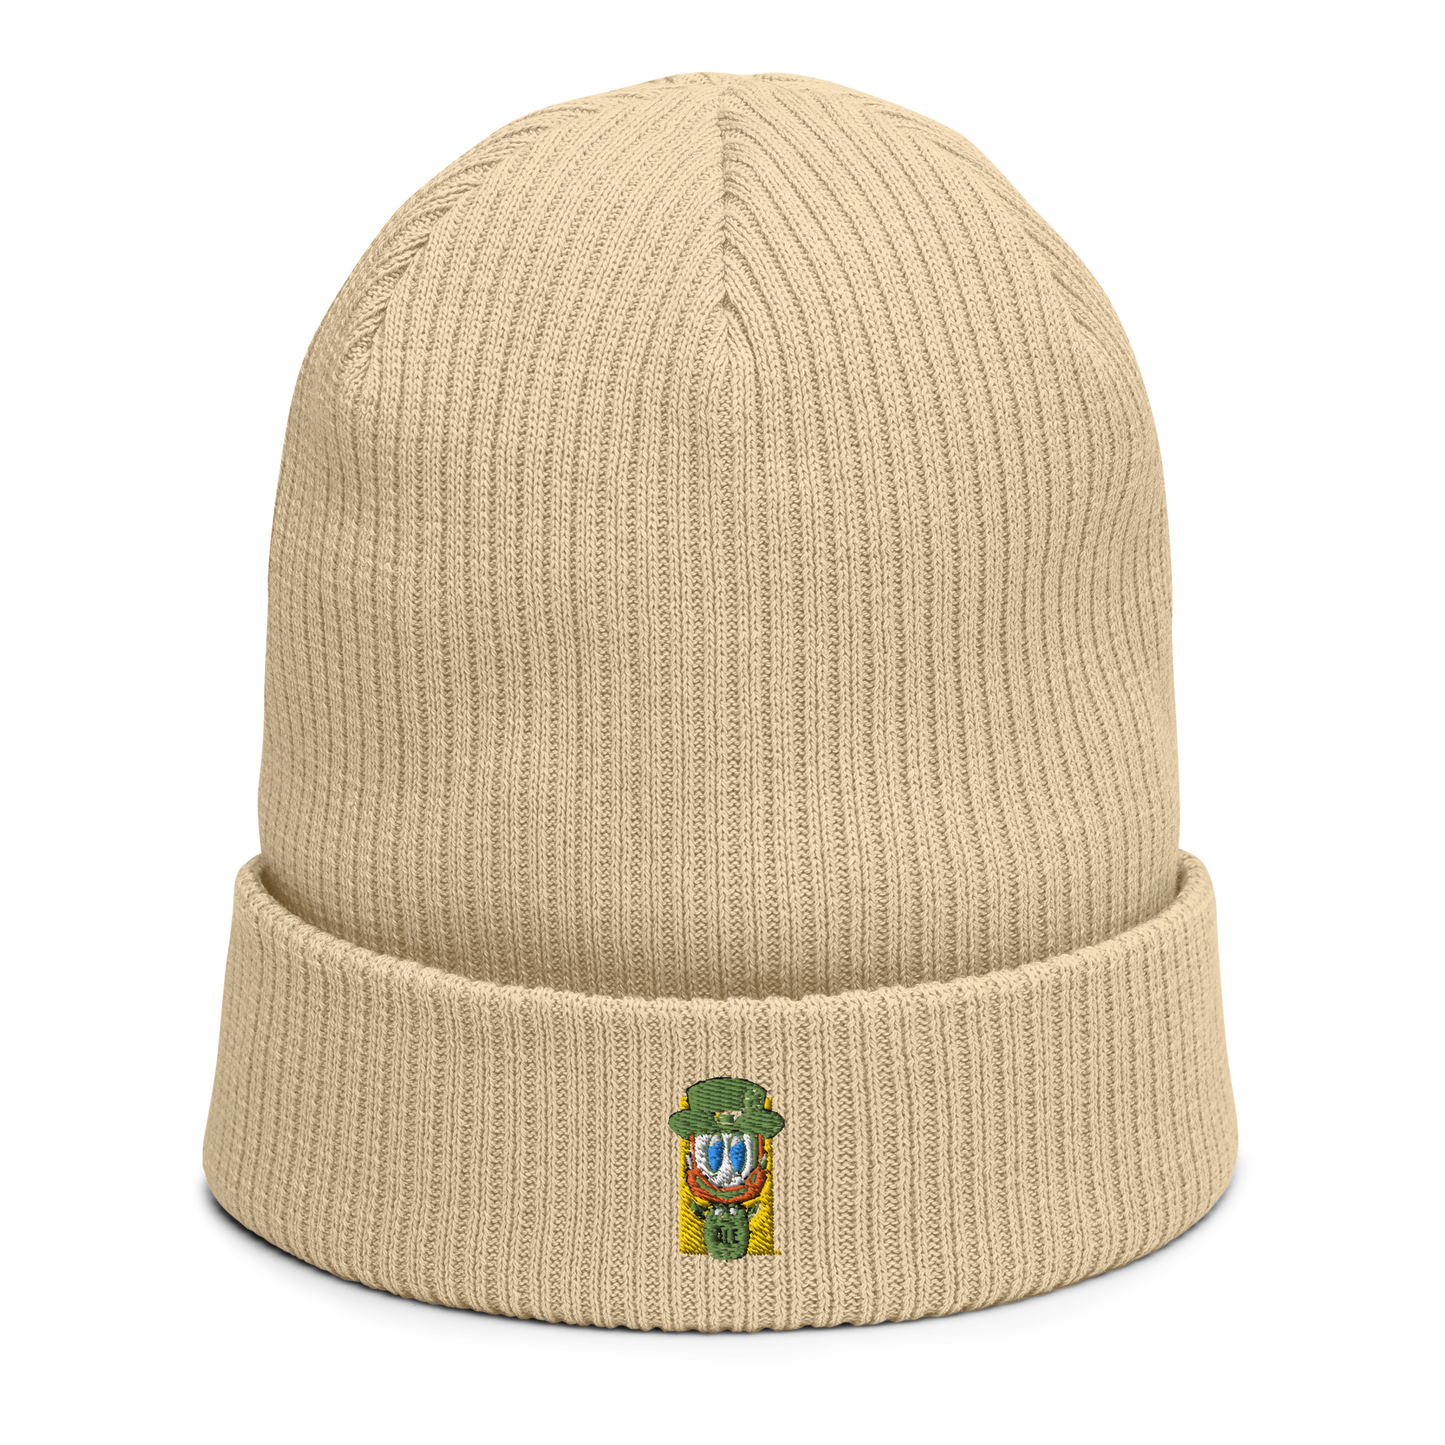 feat. SK - Organic ribbed beanie